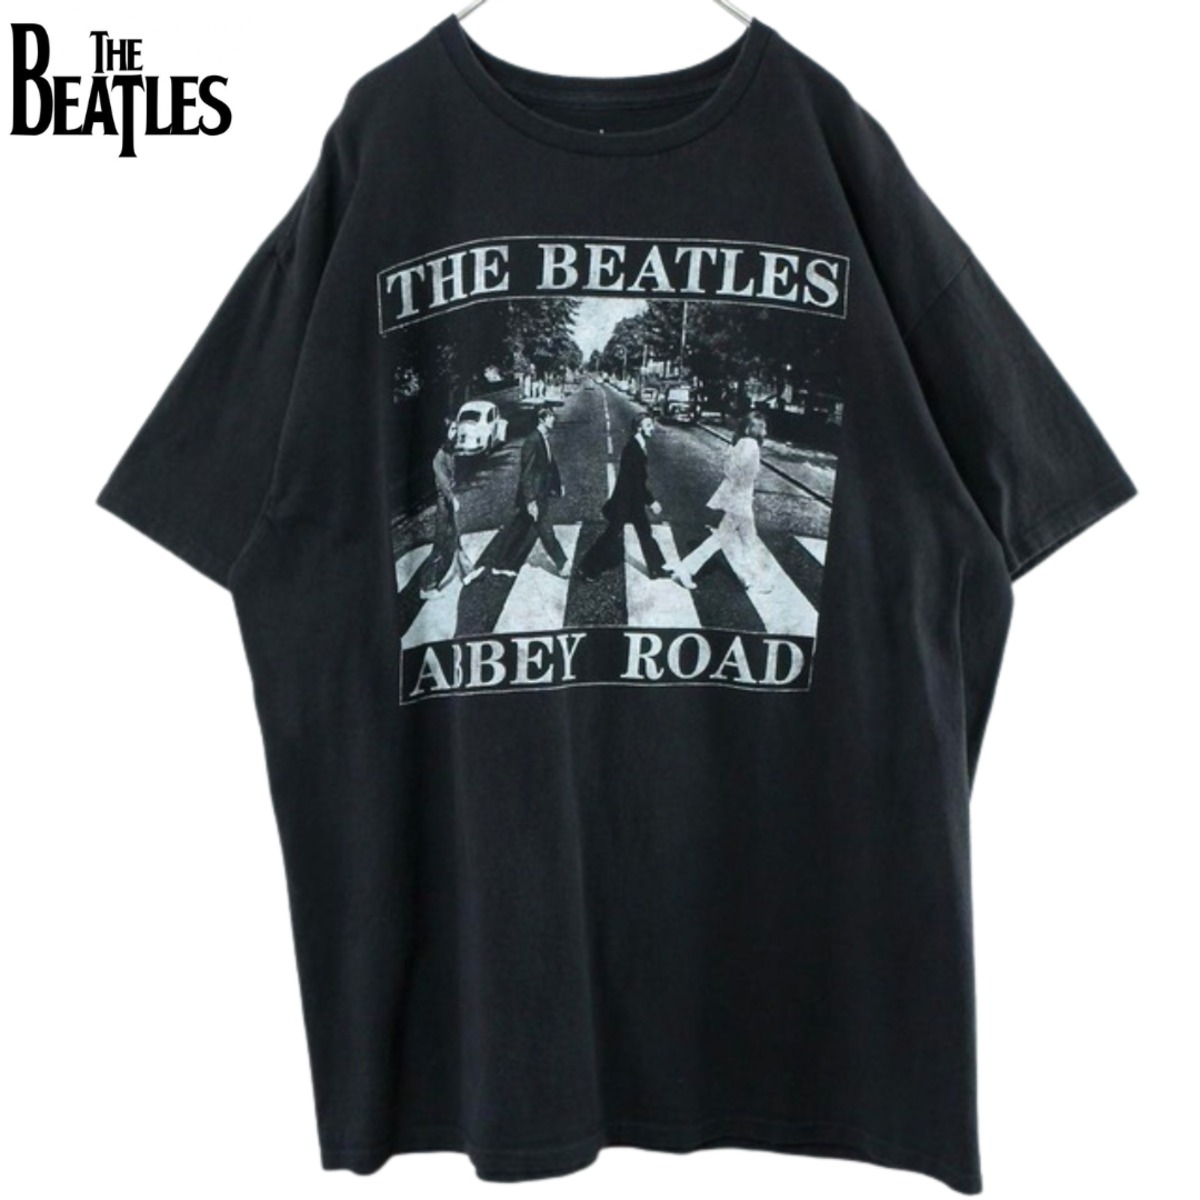 THE Beatles ビートルズ Tシャツ アビーロード バンドT プリント 公式 | 人も地球も輝く古着屋WERGLO powered by  BASE